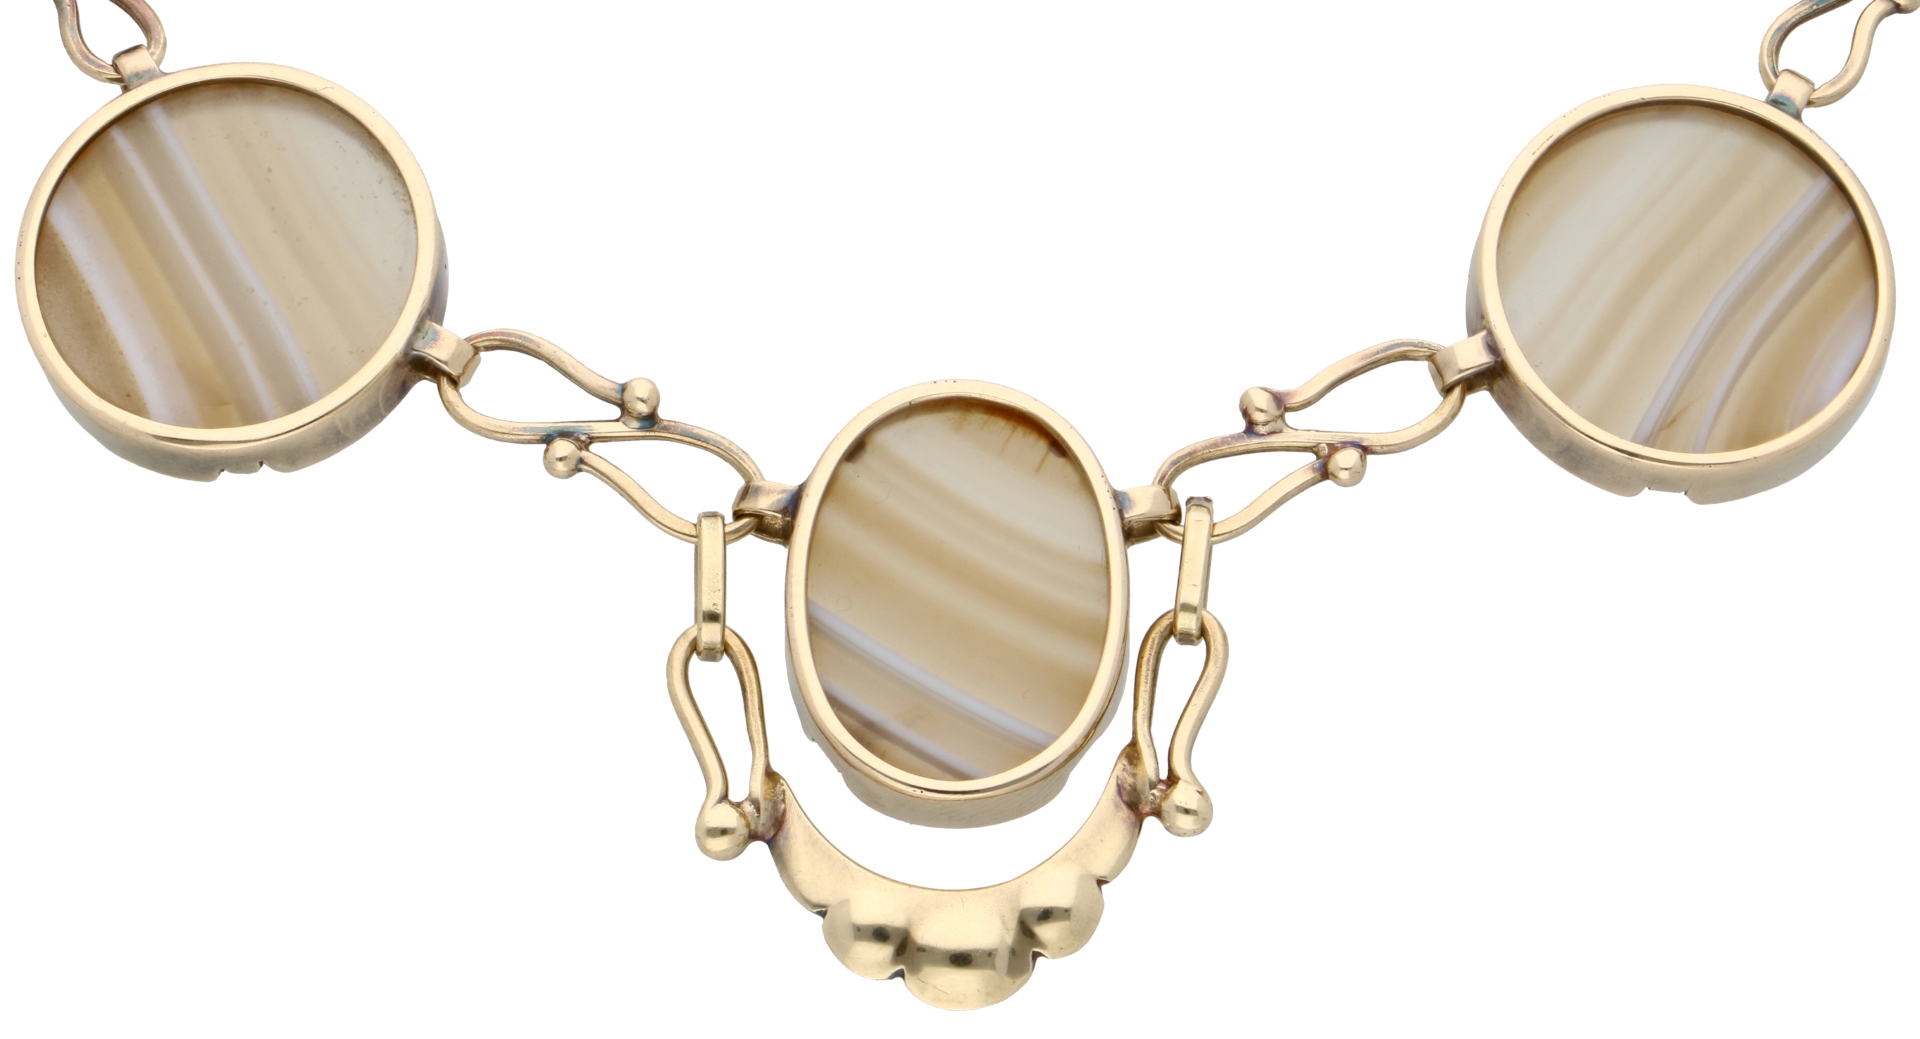 No Reserve - 14K Yellow gold necklace with agate. - Image 2 of 3